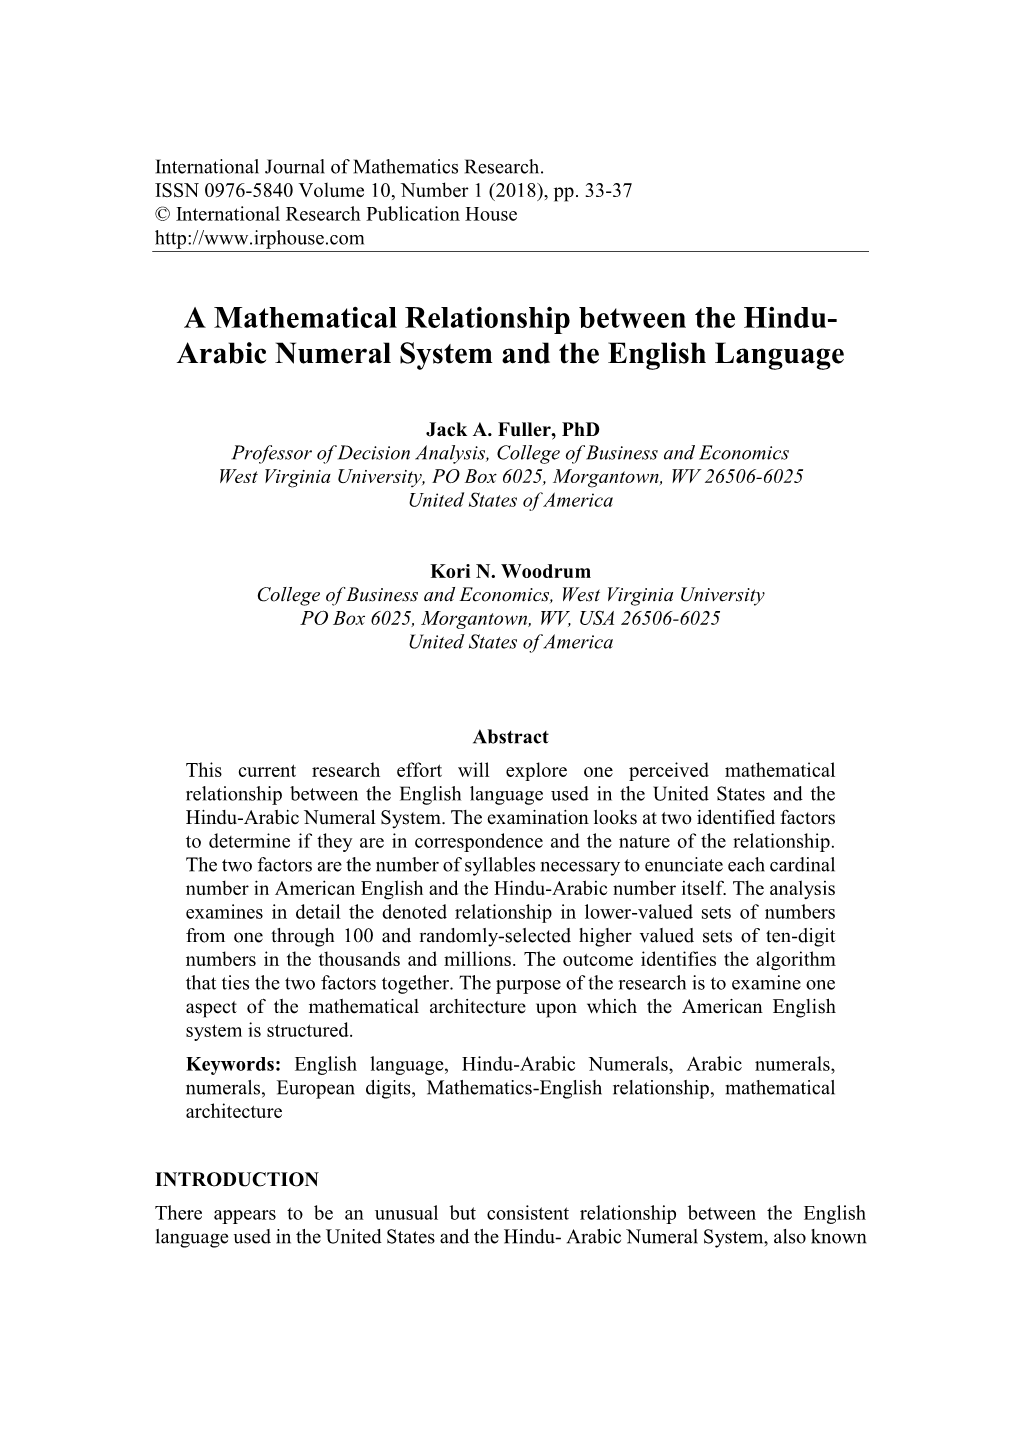 A Mathematical Relationship Between the Hindu- Arabic Numeral System and the English Language